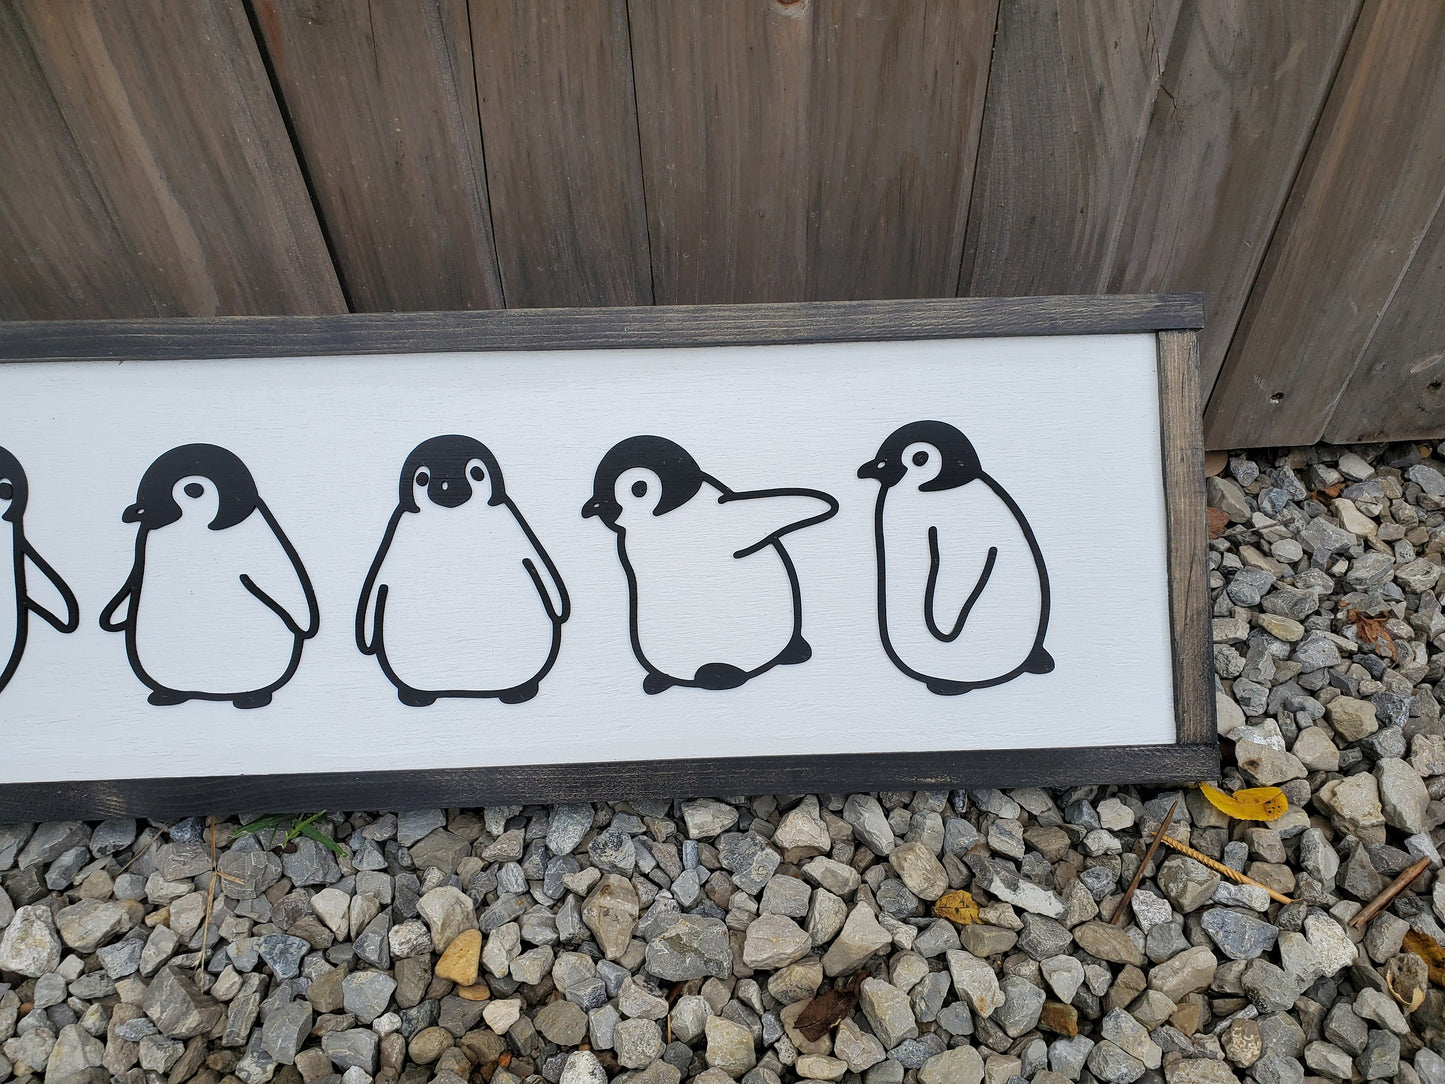 Penguins, Baby, Babies, Nursery, Winter, Silhouette, Line Art, 3D, Raised Text Sign, Rustic, Farmhouse, Shabby Chic, Wood, White and Black